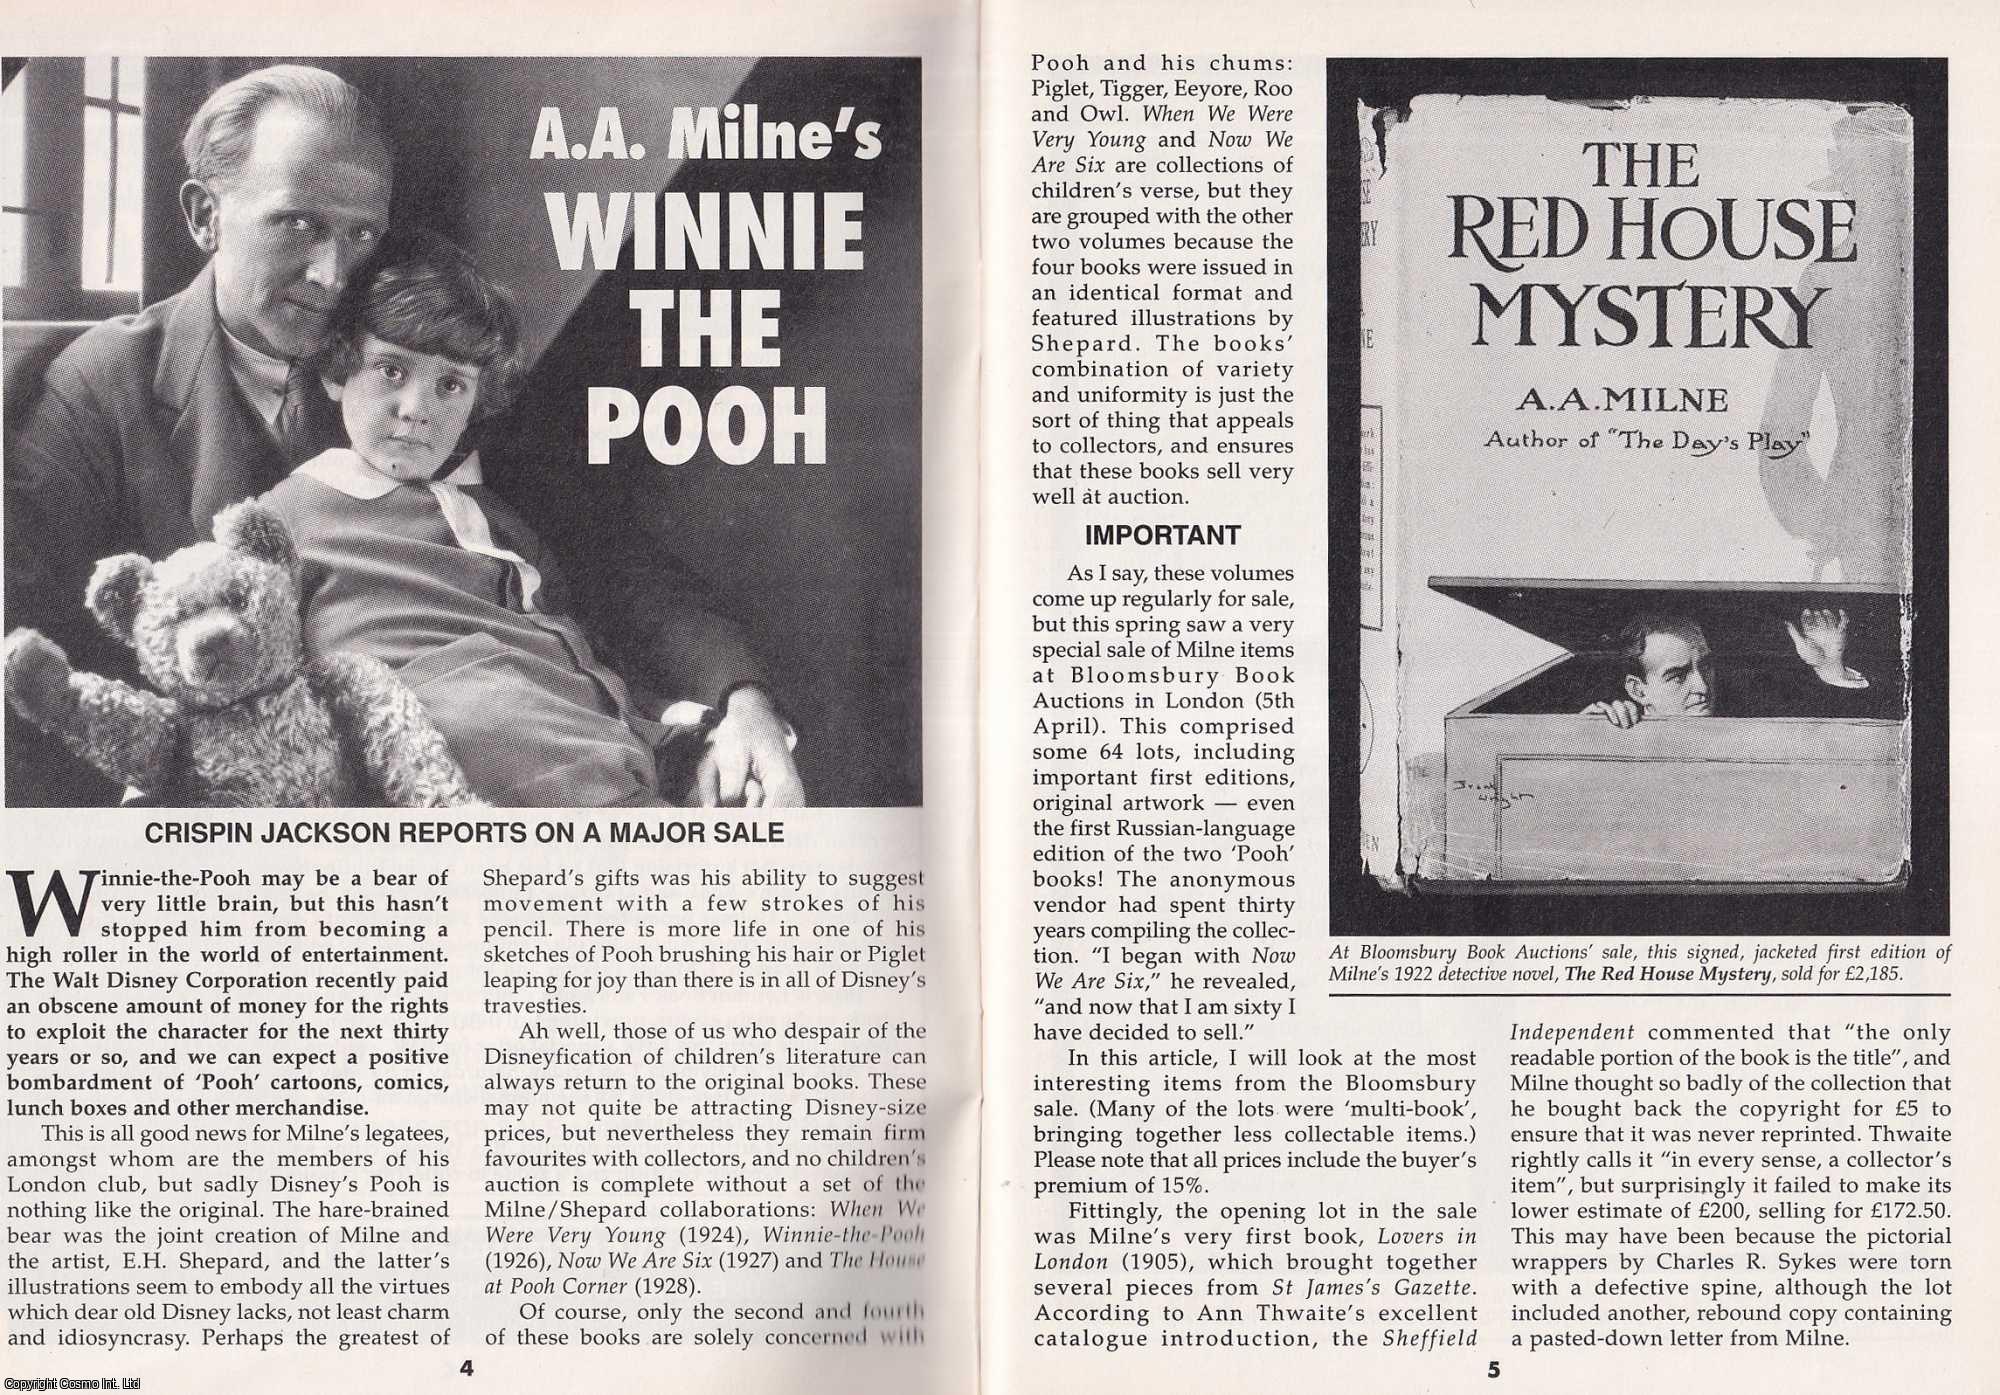 Crispin Jackson - A. A. Milne's Winnie The Pooh. This is an original article separated from an issue of The Book & Magazine Collector publication.